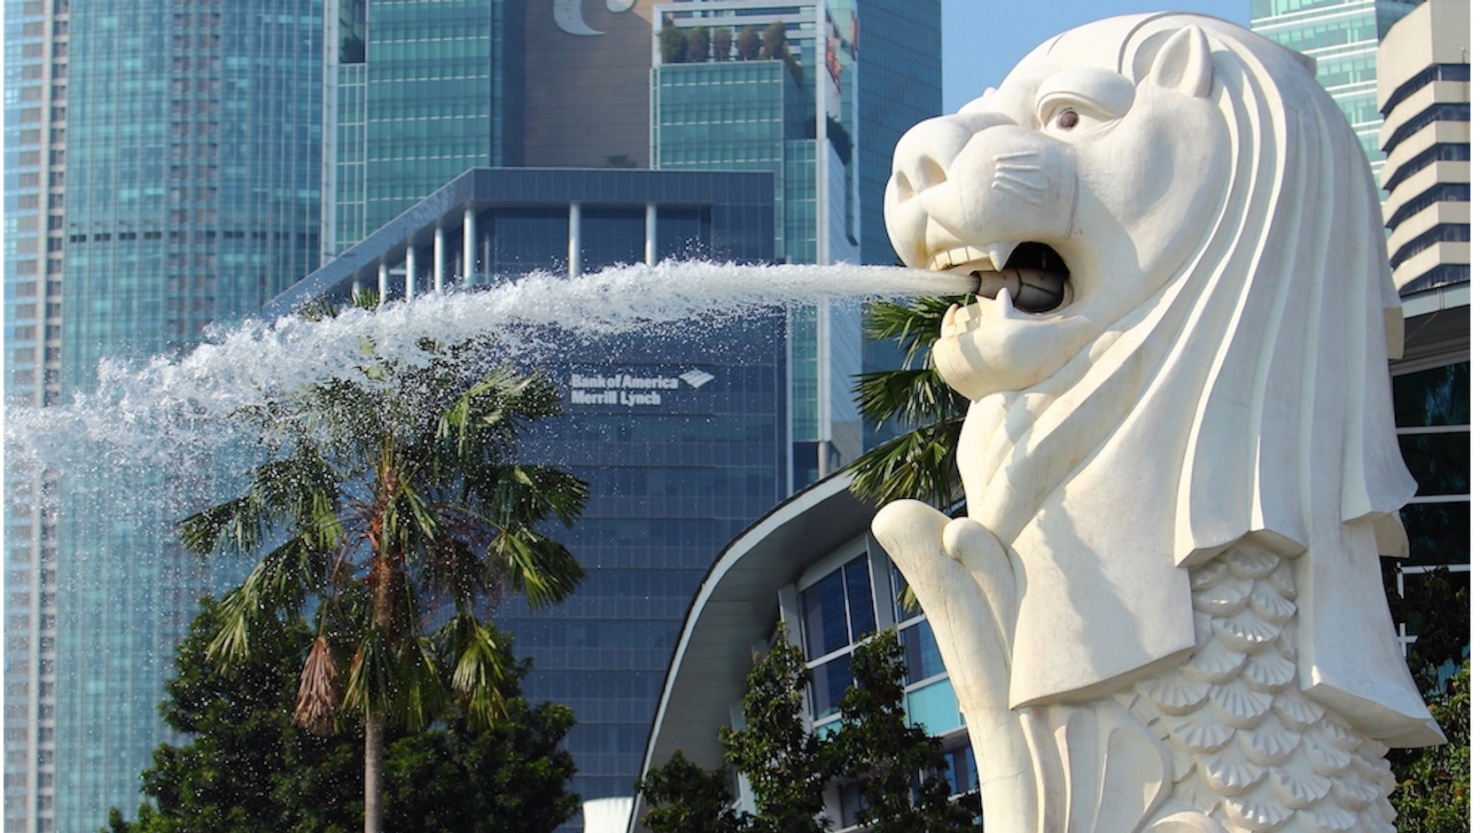 Merlion Maintenance Begins Today: Singapores Iconic Statue Set for 12-Week Repair Works